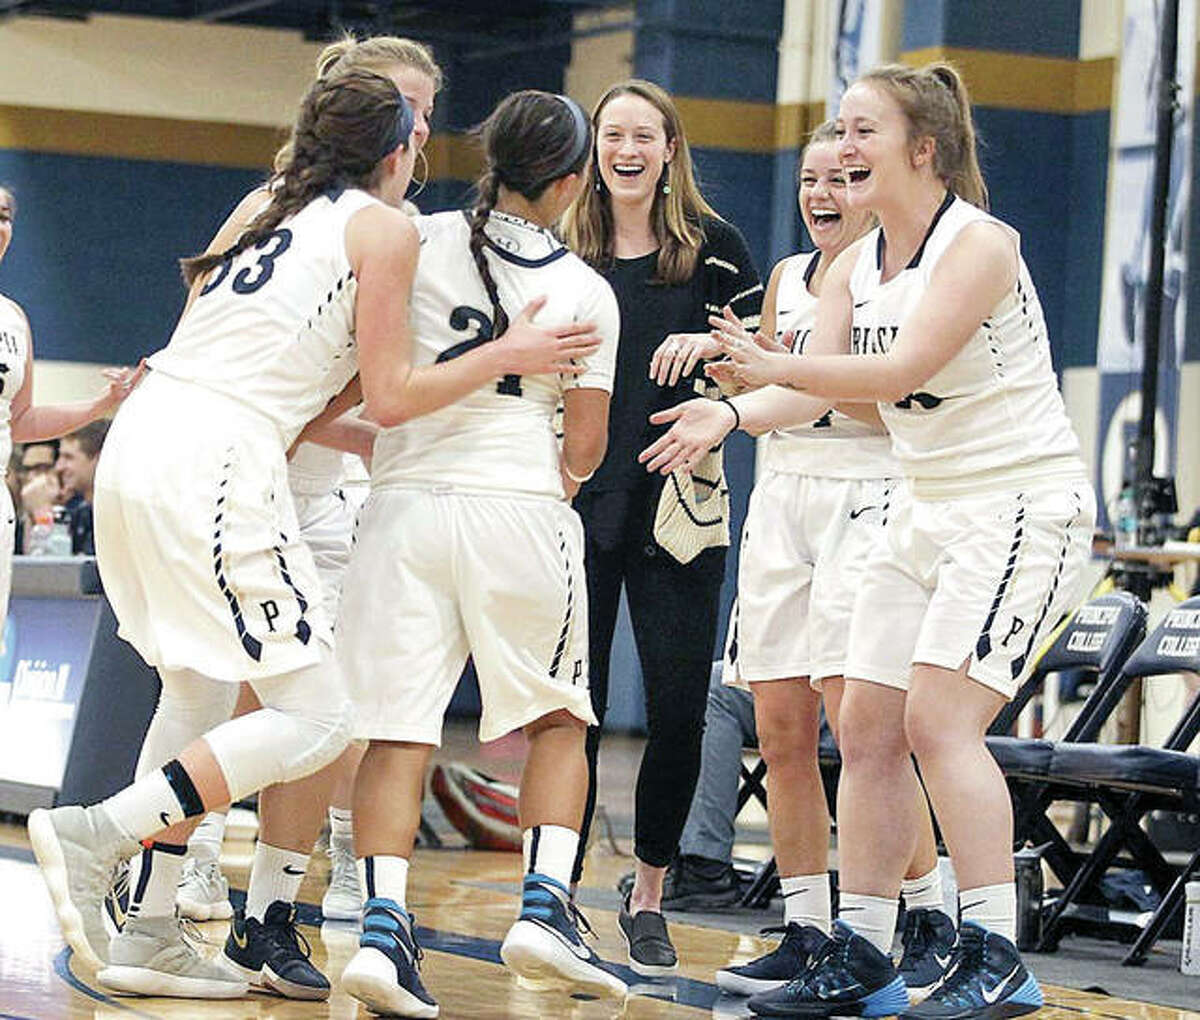 Members of the Principia College junior varsity women’s basketball team celenrate during a recent game. Prin has announced that it will bring back varsity women’s basketball next season following a two-season absence.